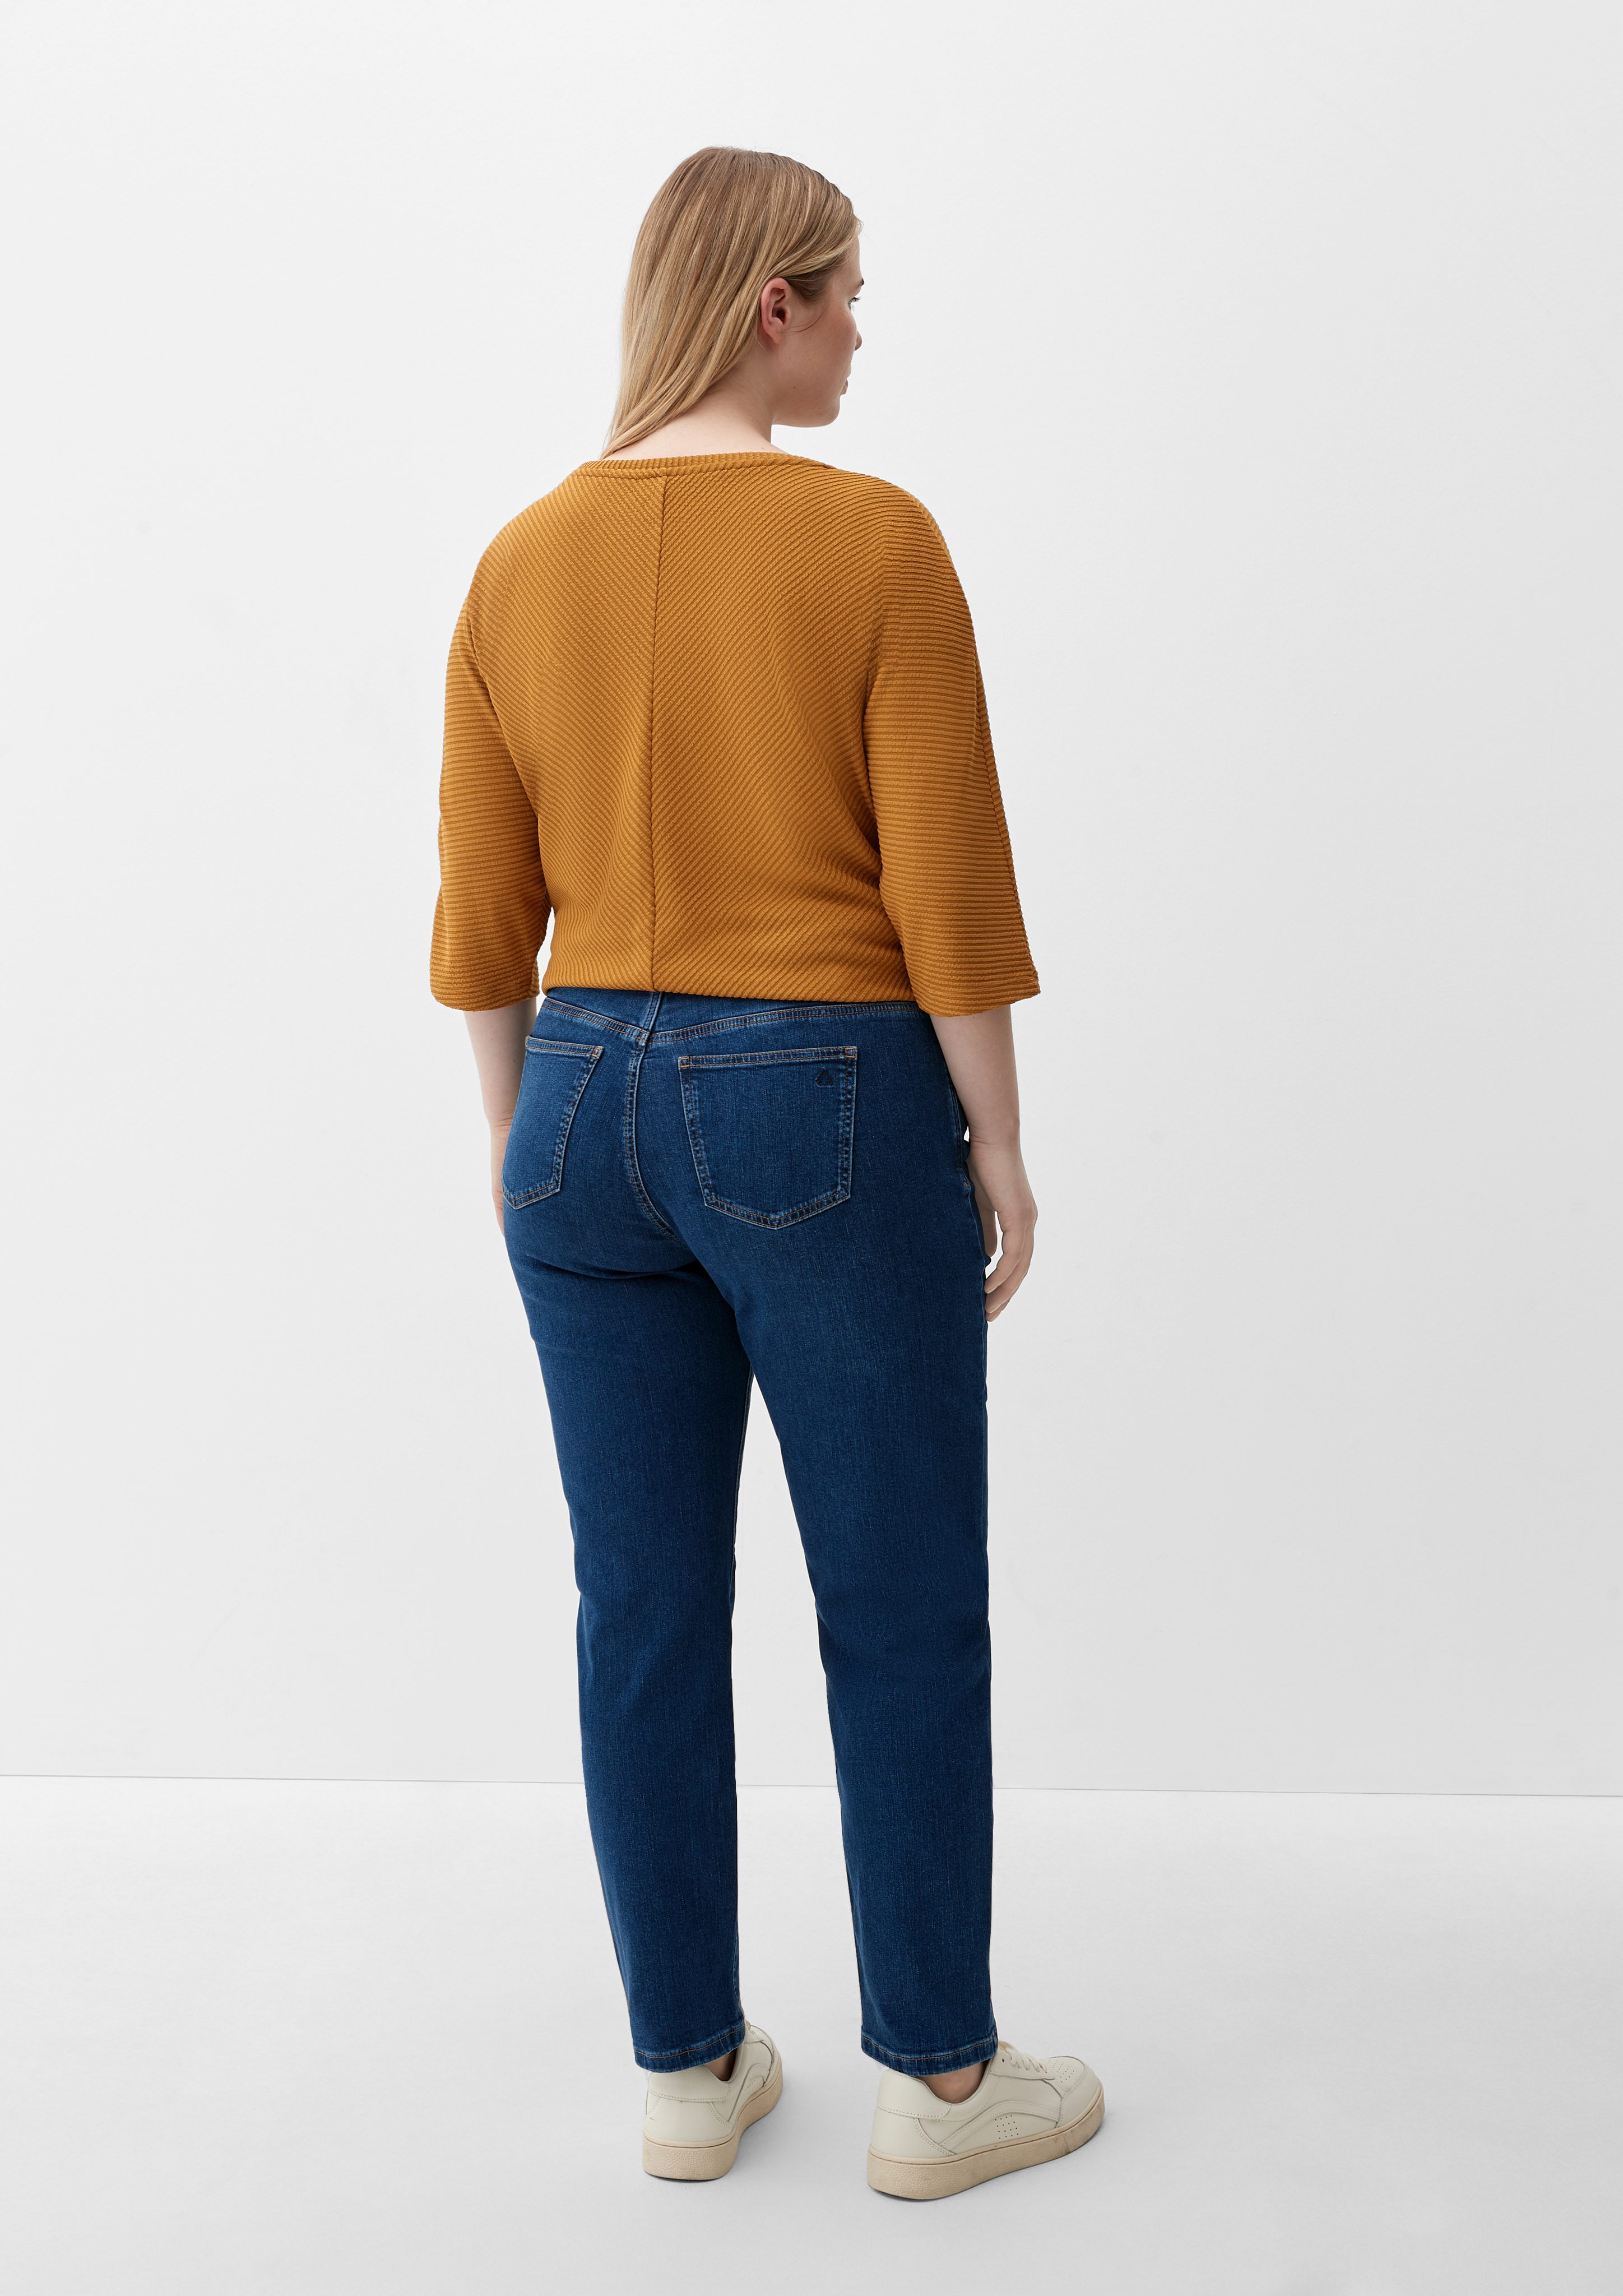 TRIANGLE Stoffhose Jeans / / Waschung, Straight Slim Leg Mid Fit Rise / Kontrastnähte